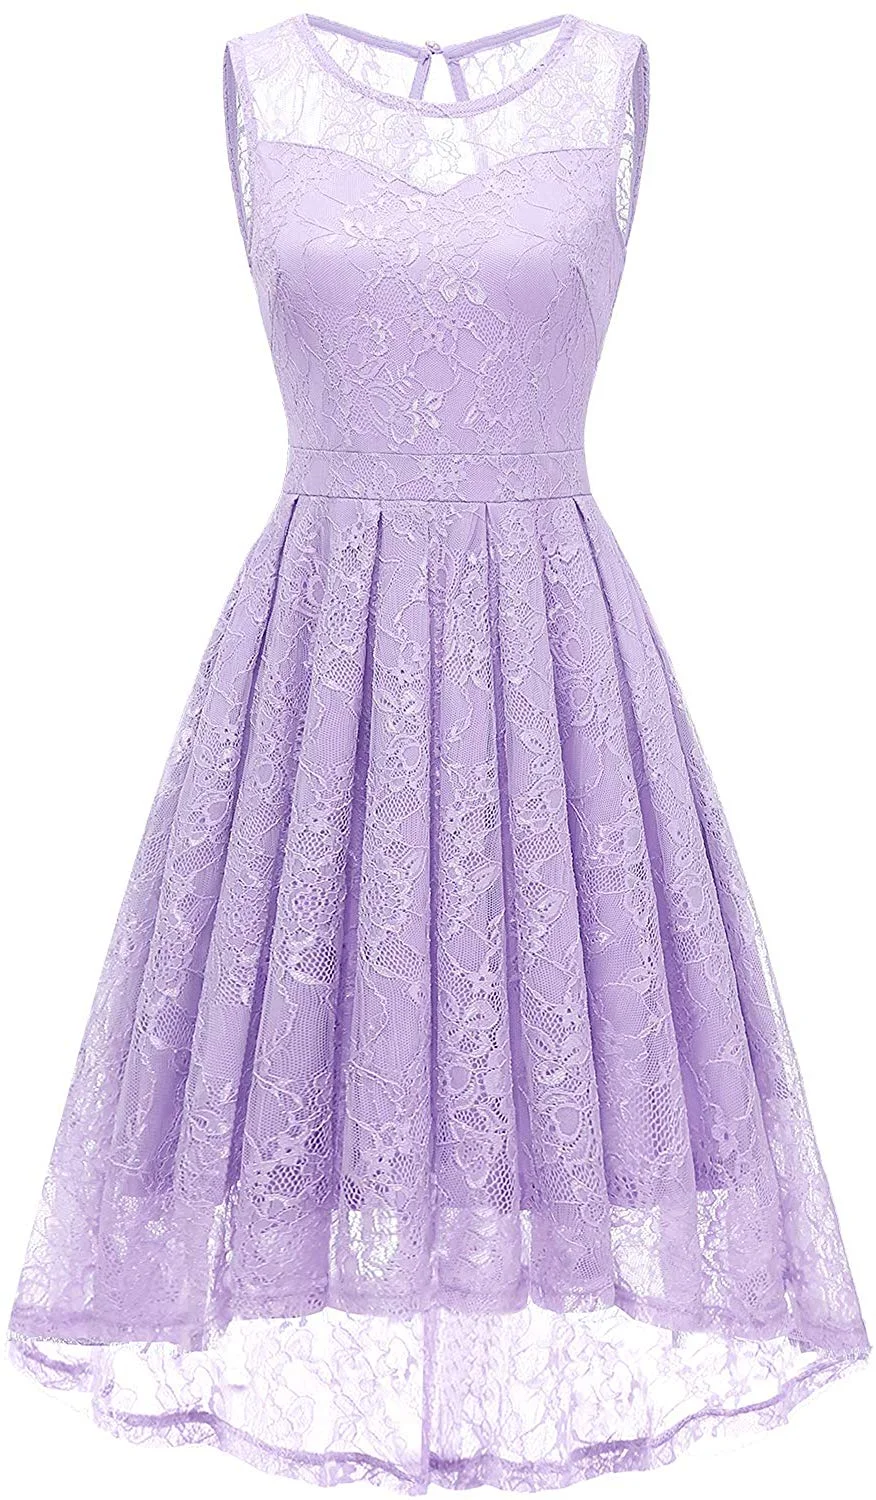 Women's Vintage Lace Bridesmaid Dress High Low Cocktail Formal Swing Dress